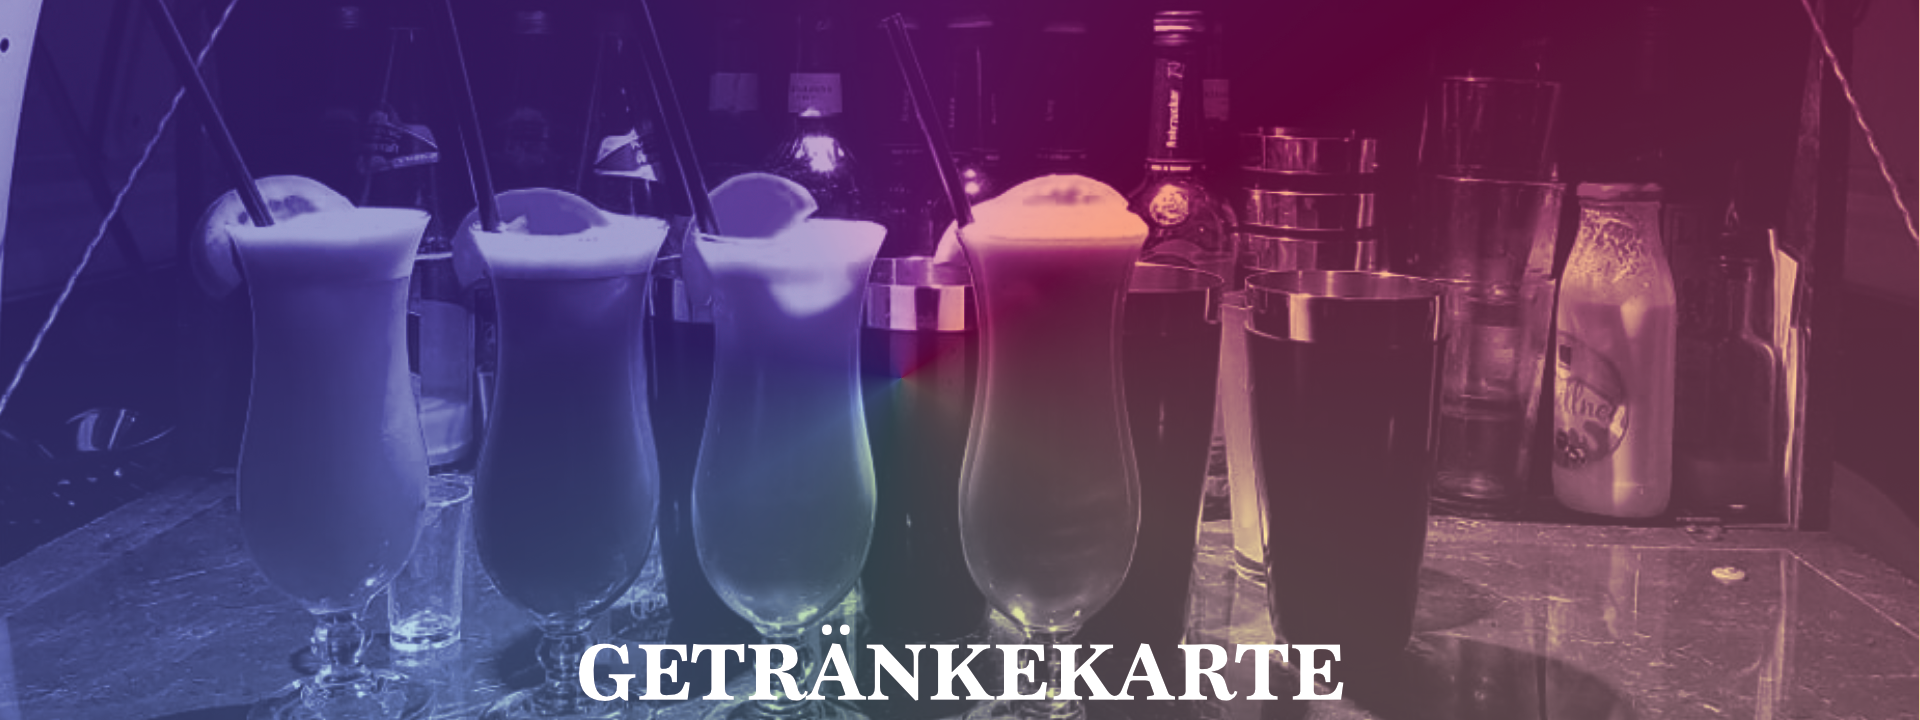 Cocktail Lieferservice 2